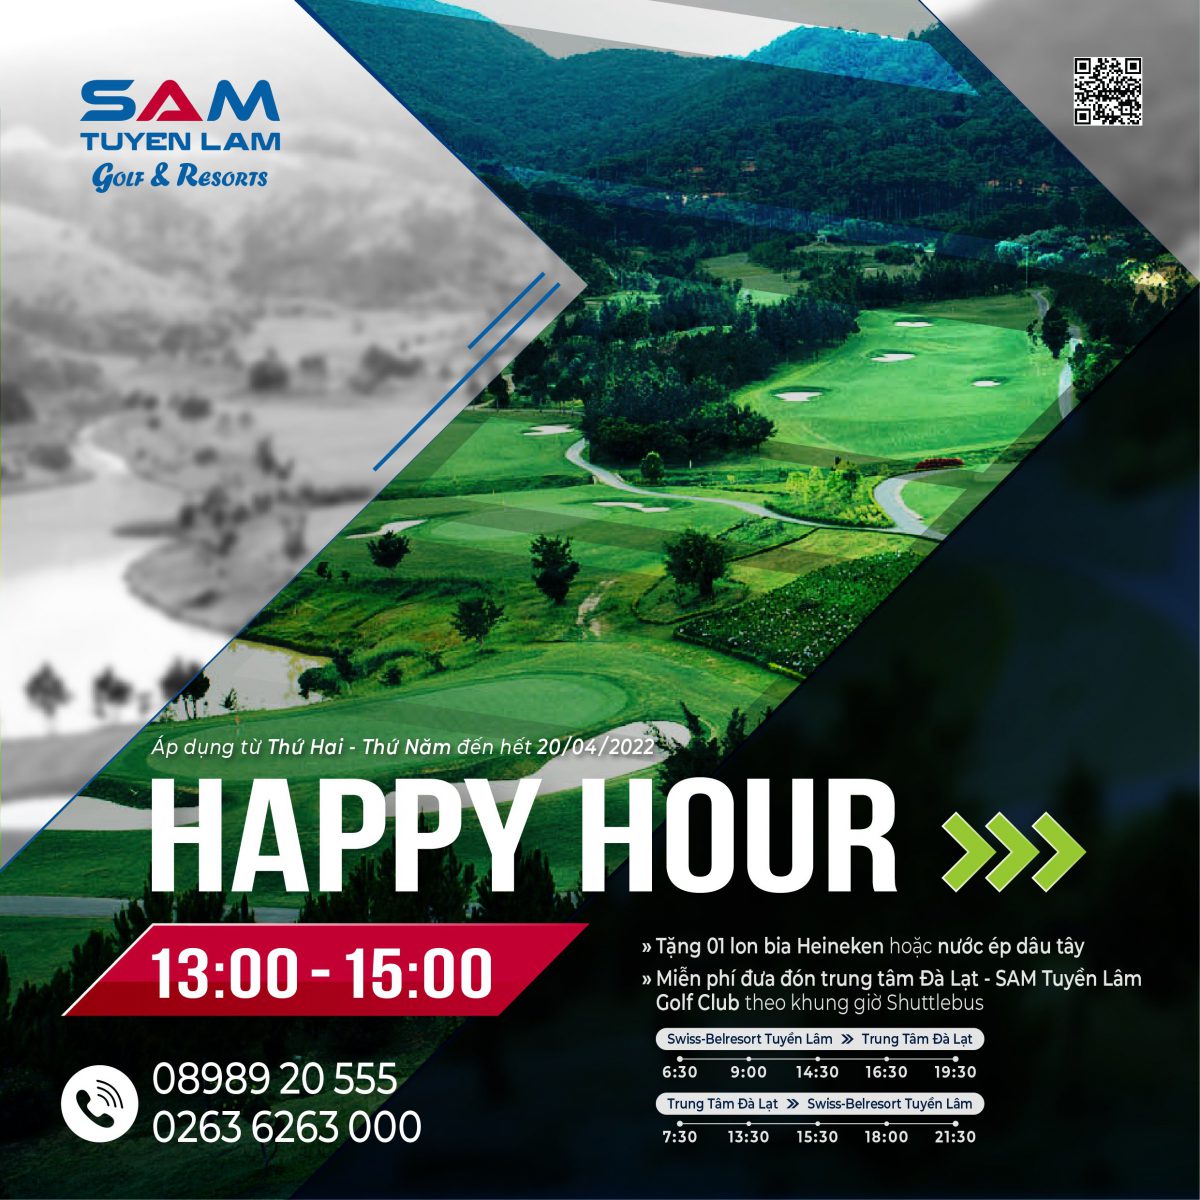 (Tiếng Việt) HAPPY HOUR – HAPPY GOLF TIME